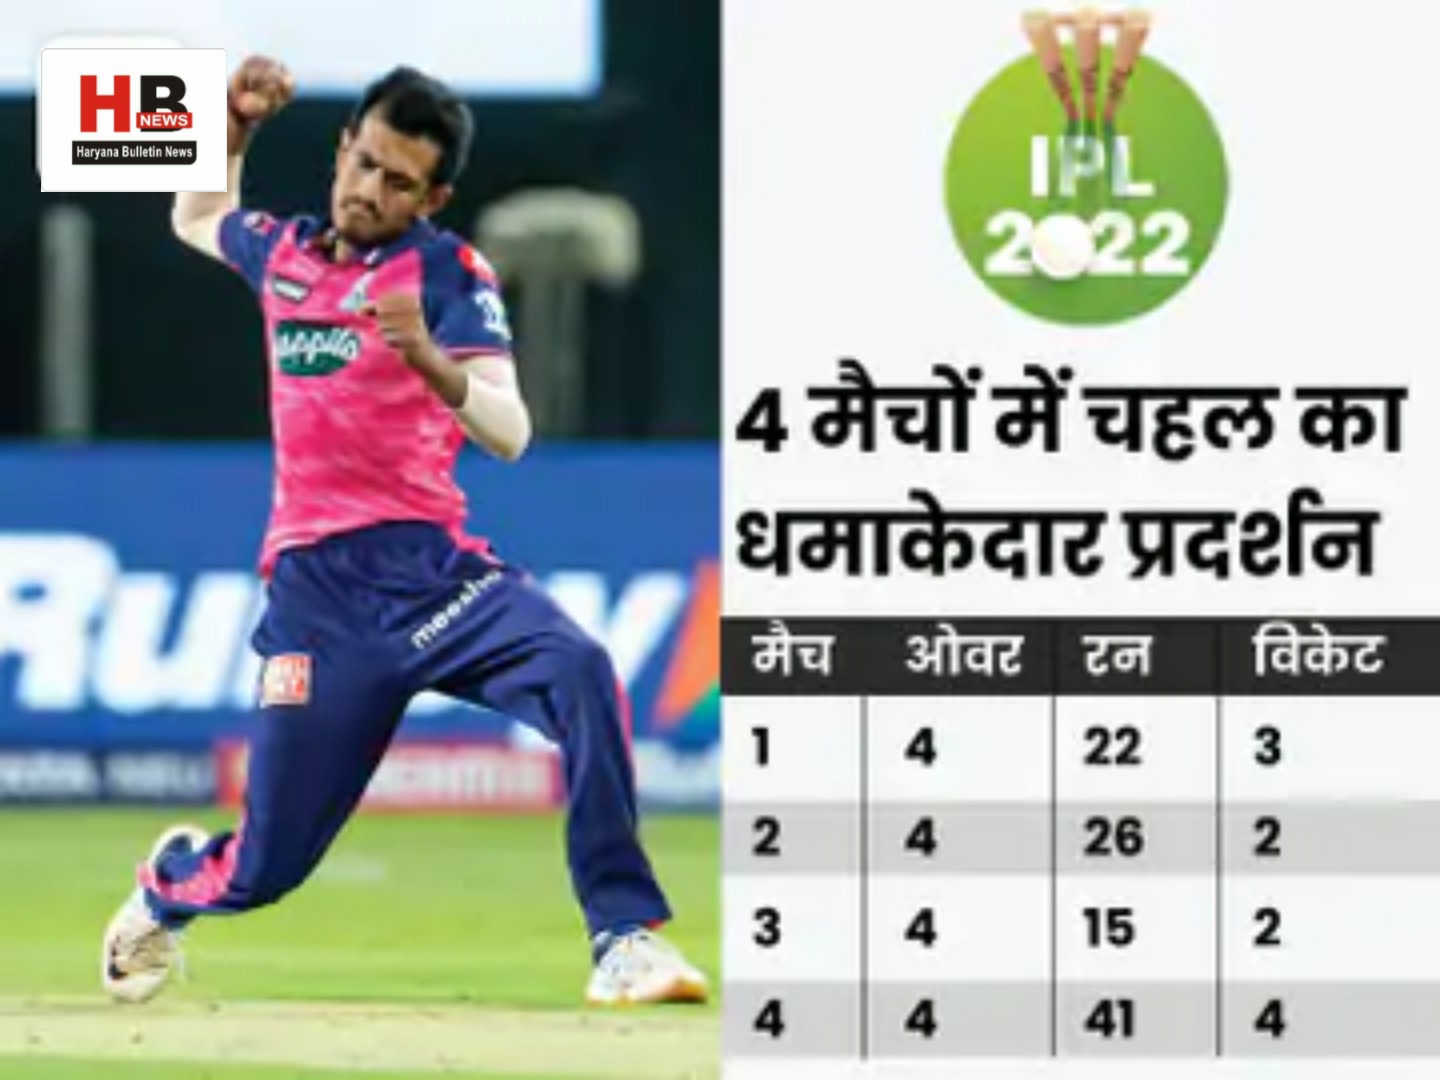 Mhara Yuzvendra at No.-1 with 11 wickets in IPL: Chahal's career flourished from the pitch built in Jind's Happy School and Farm; Watch today's match